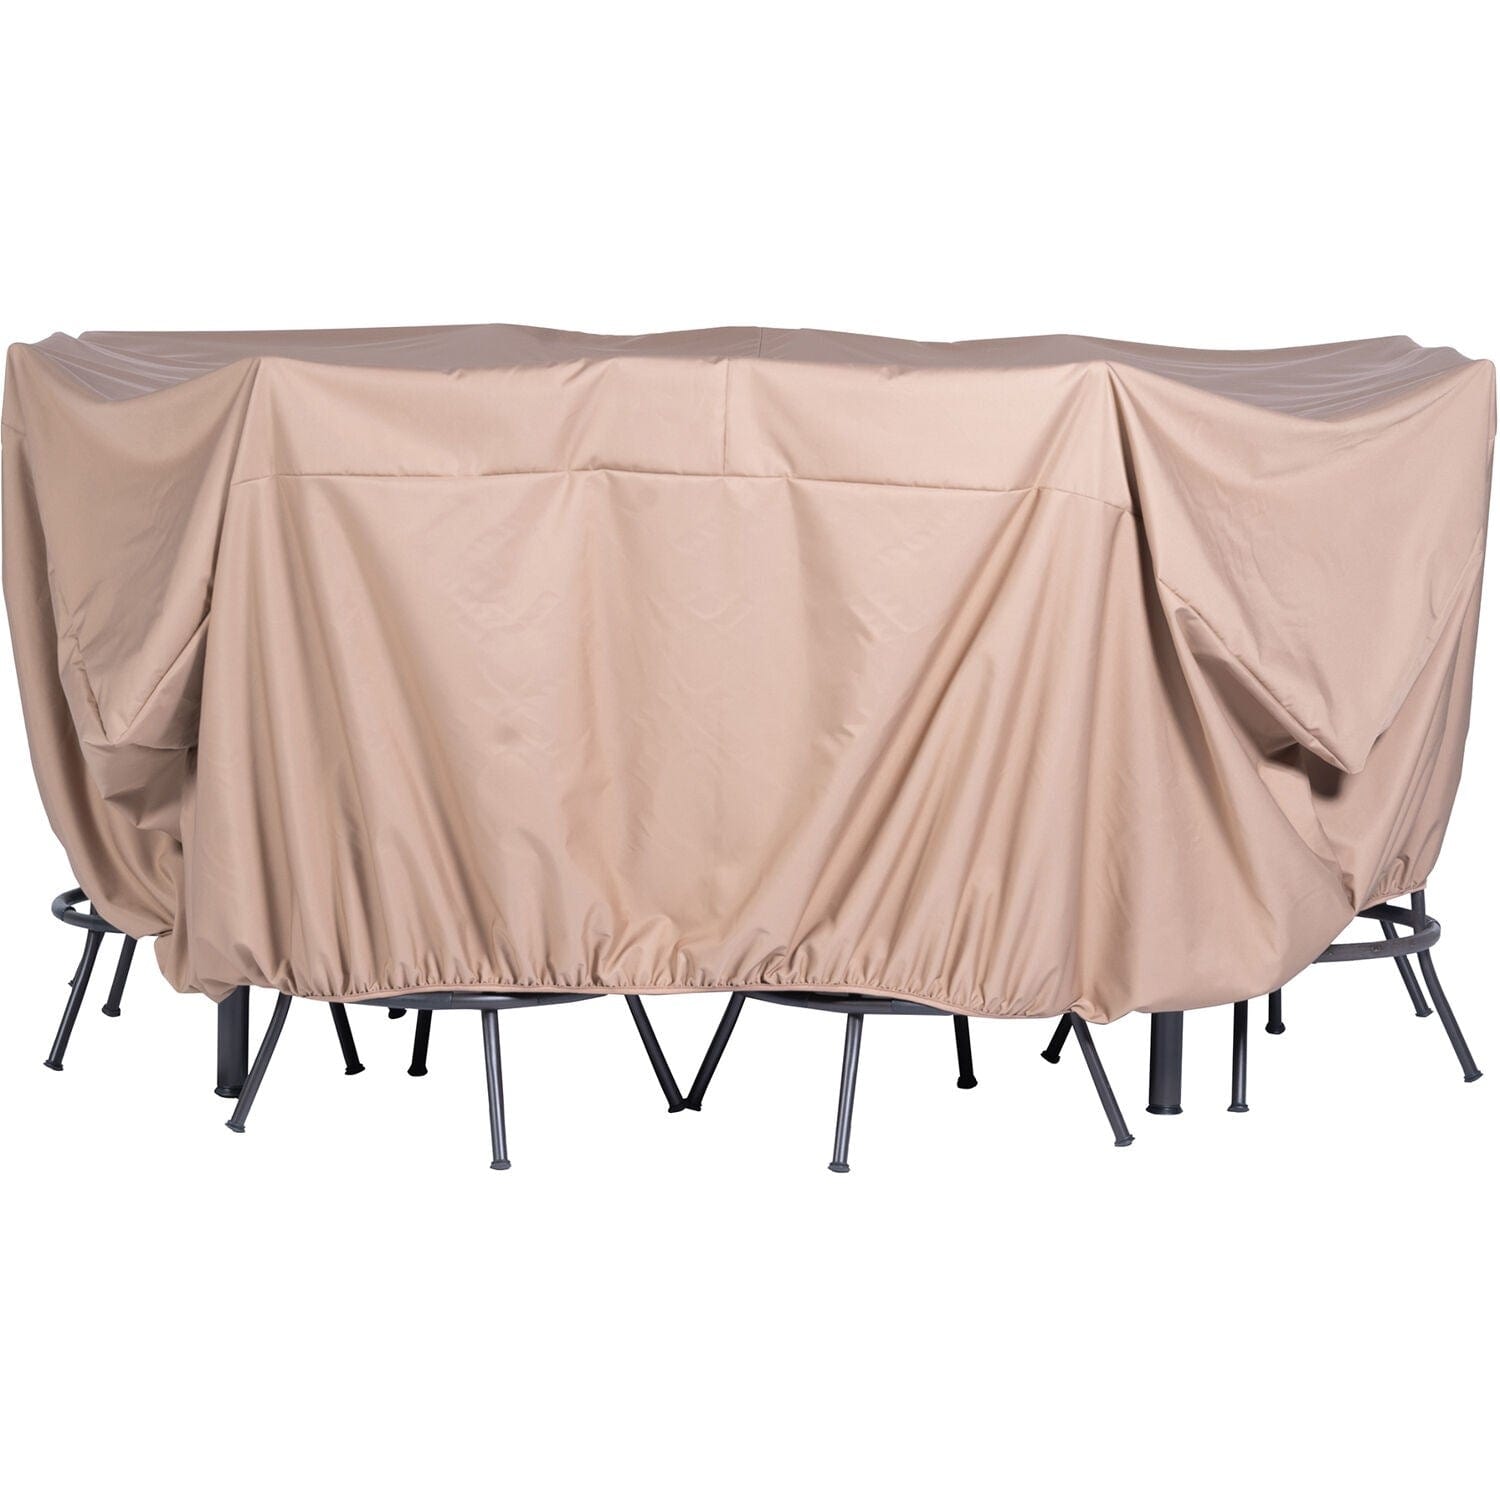 Hanover Outdoor Cover Hanover - Cover for 4pc Round or Square Dining Set - Tan | HANCVR-4PCDN